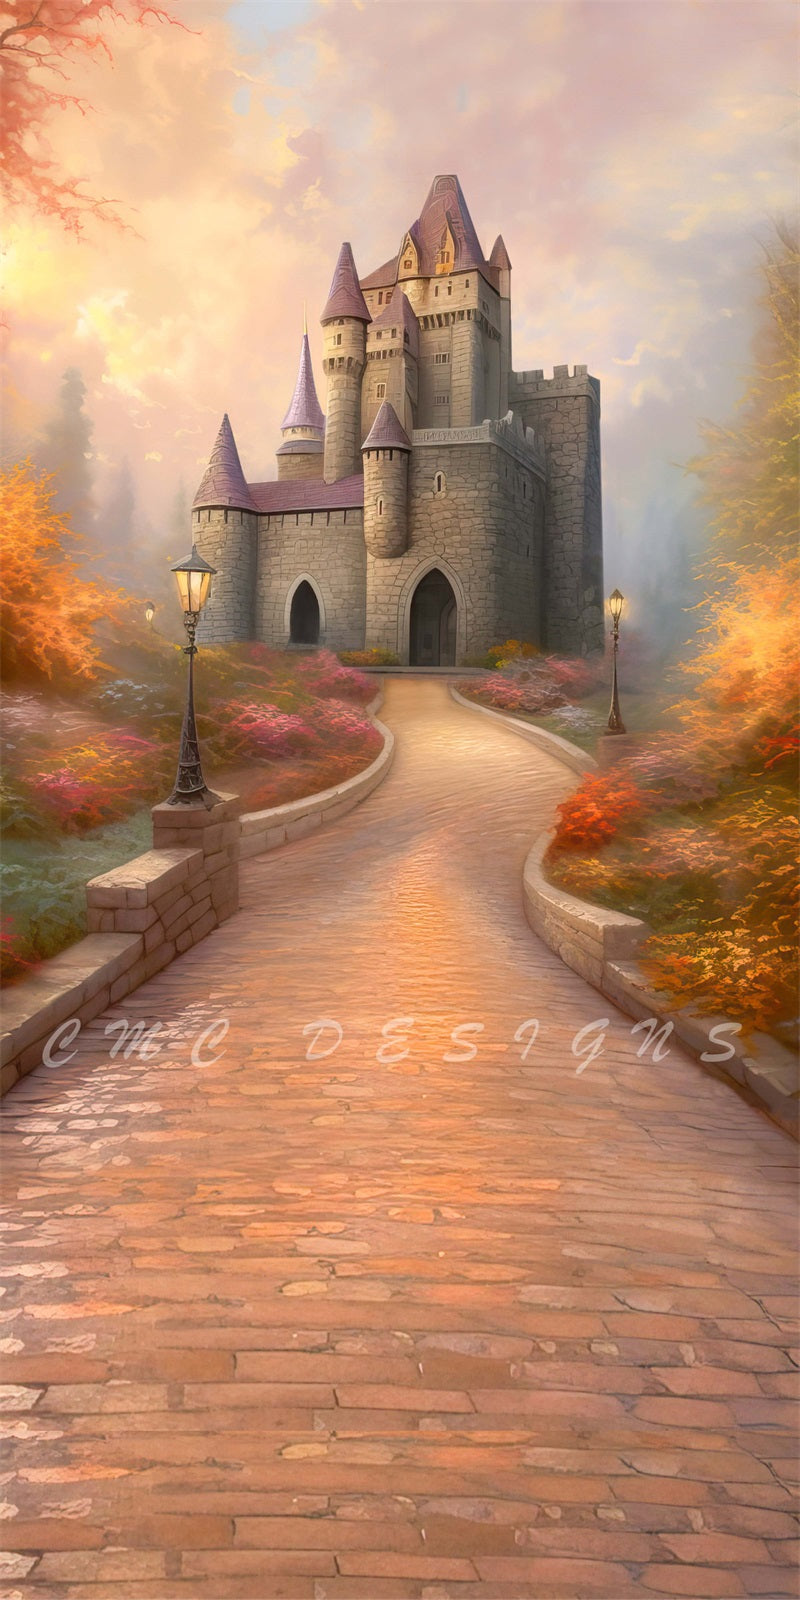 Kate Sweep Magical Autumn Retro Castle Backdrop for Photography Designed by Candice Compton